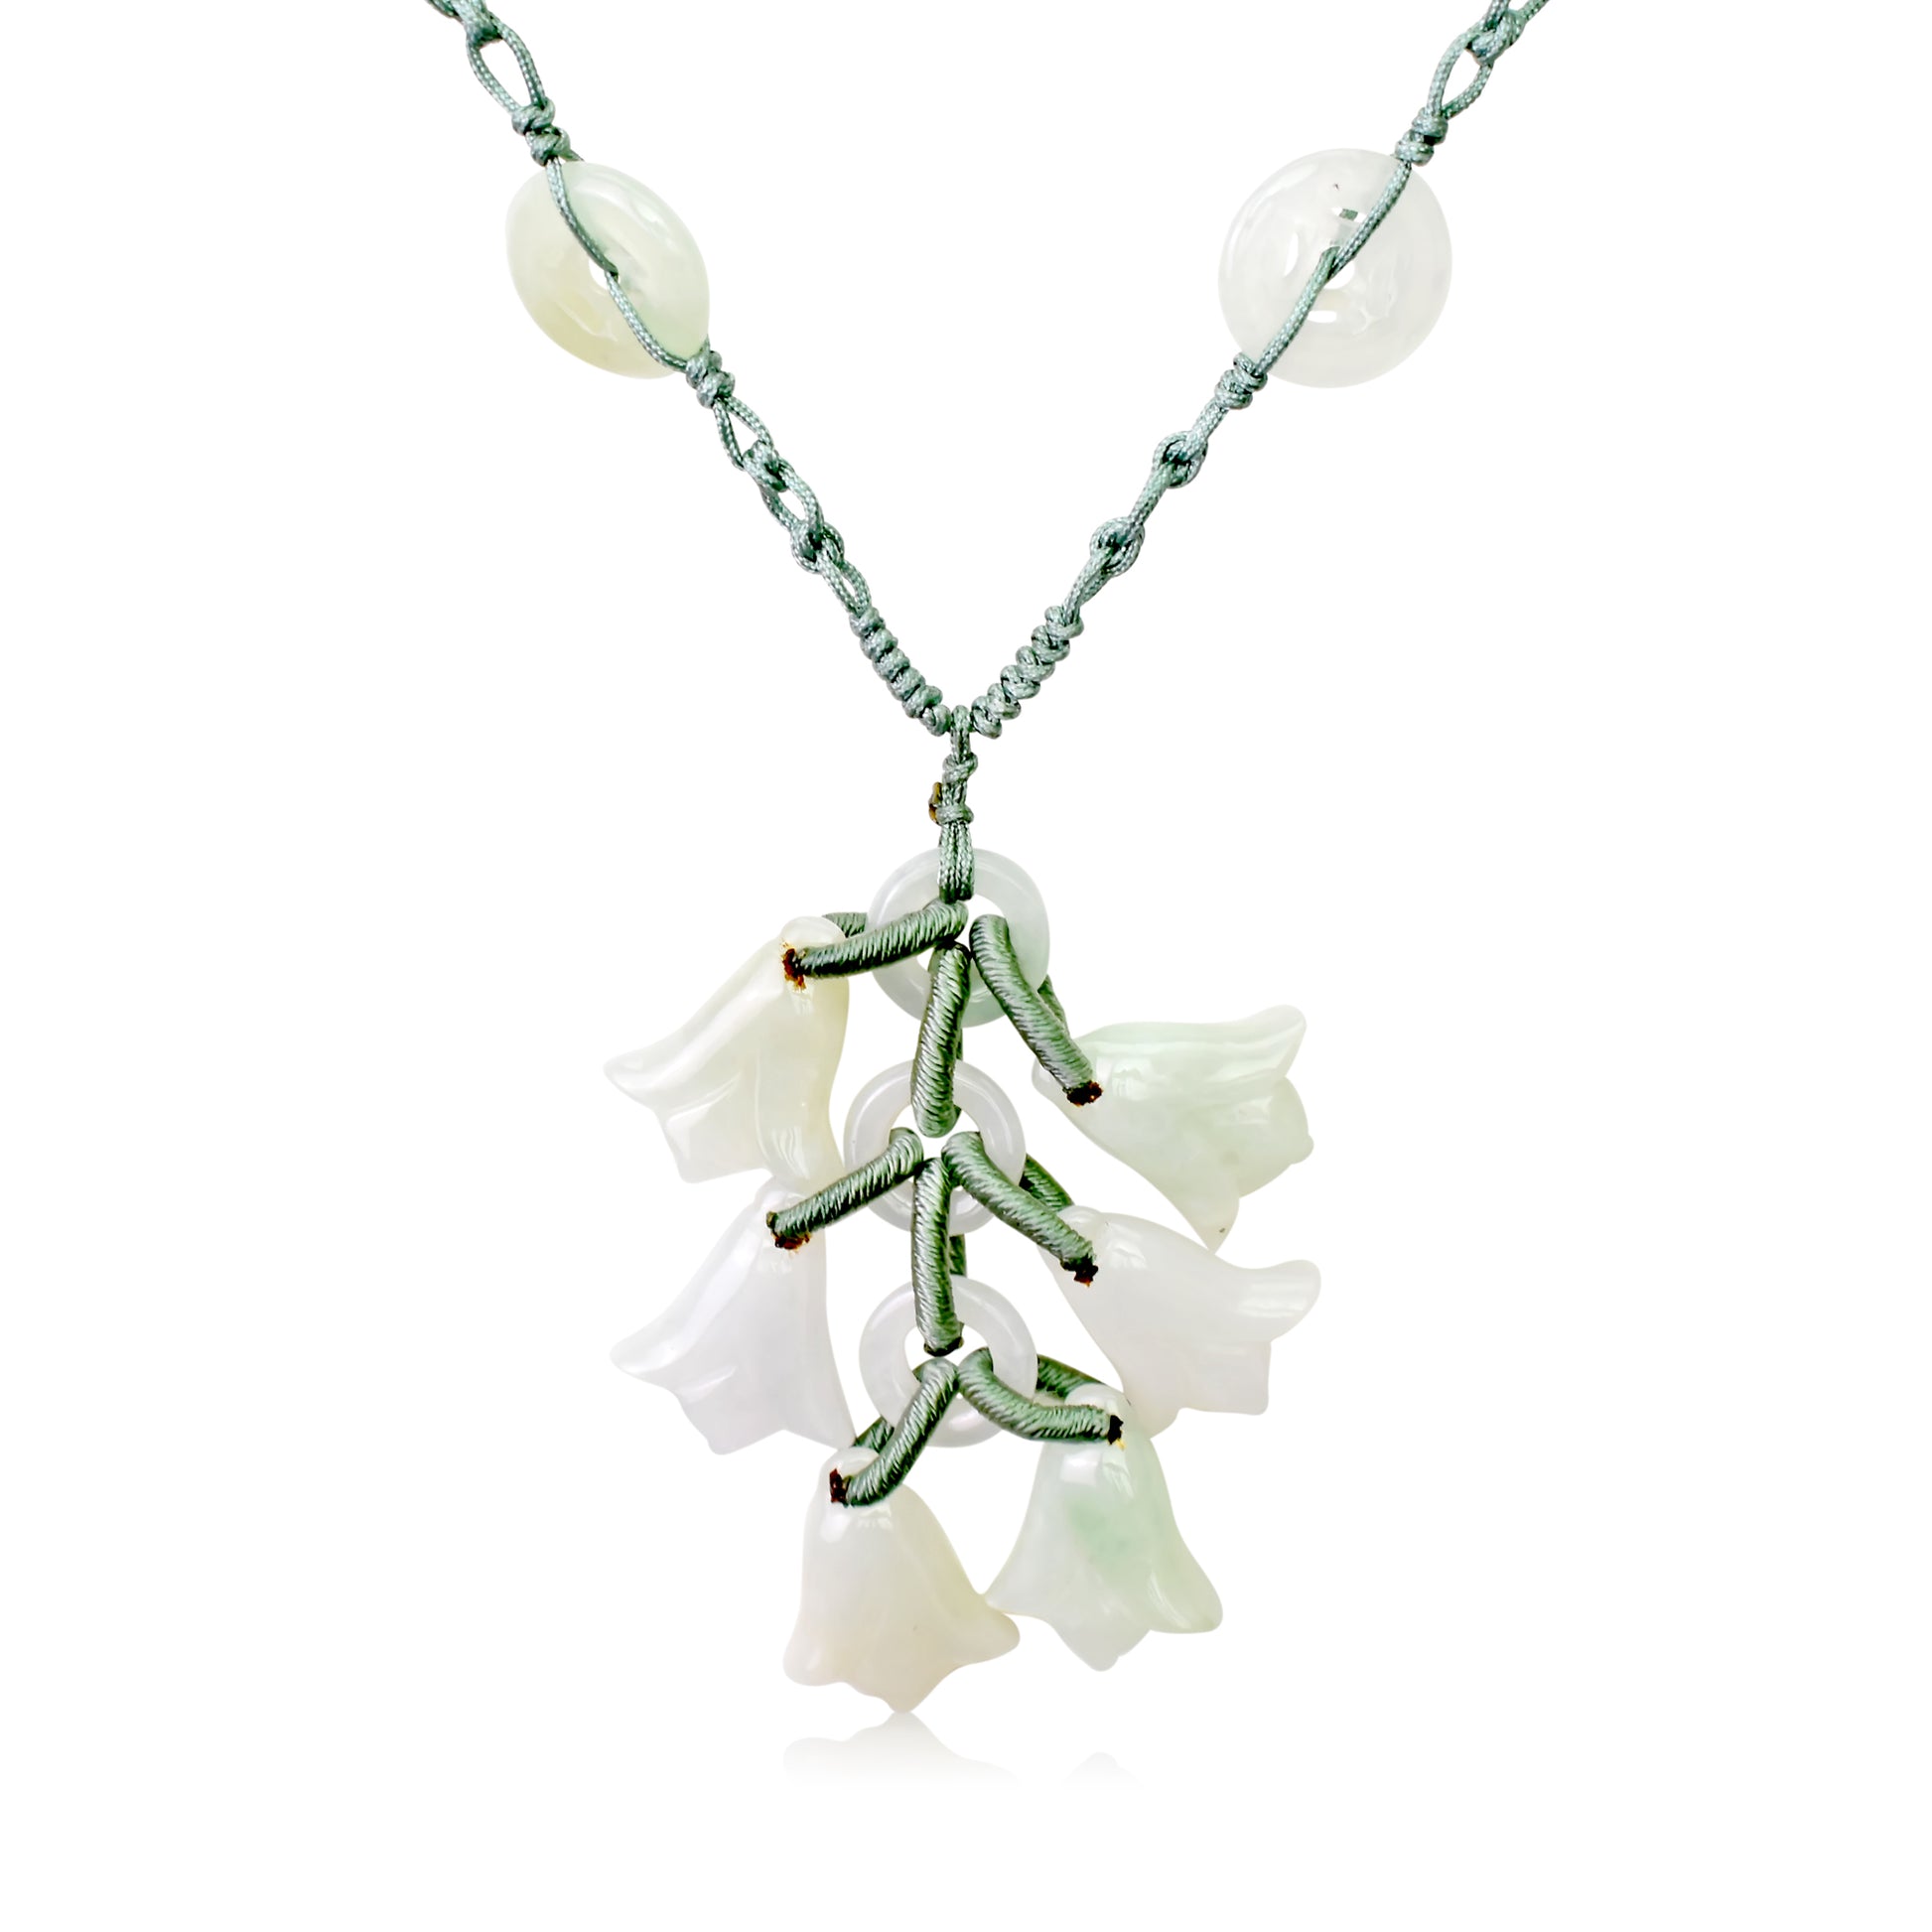 Beautiful and Dainty Bellflower Dangles Handmade Jade Necklace Pendant with Sea Green Cord